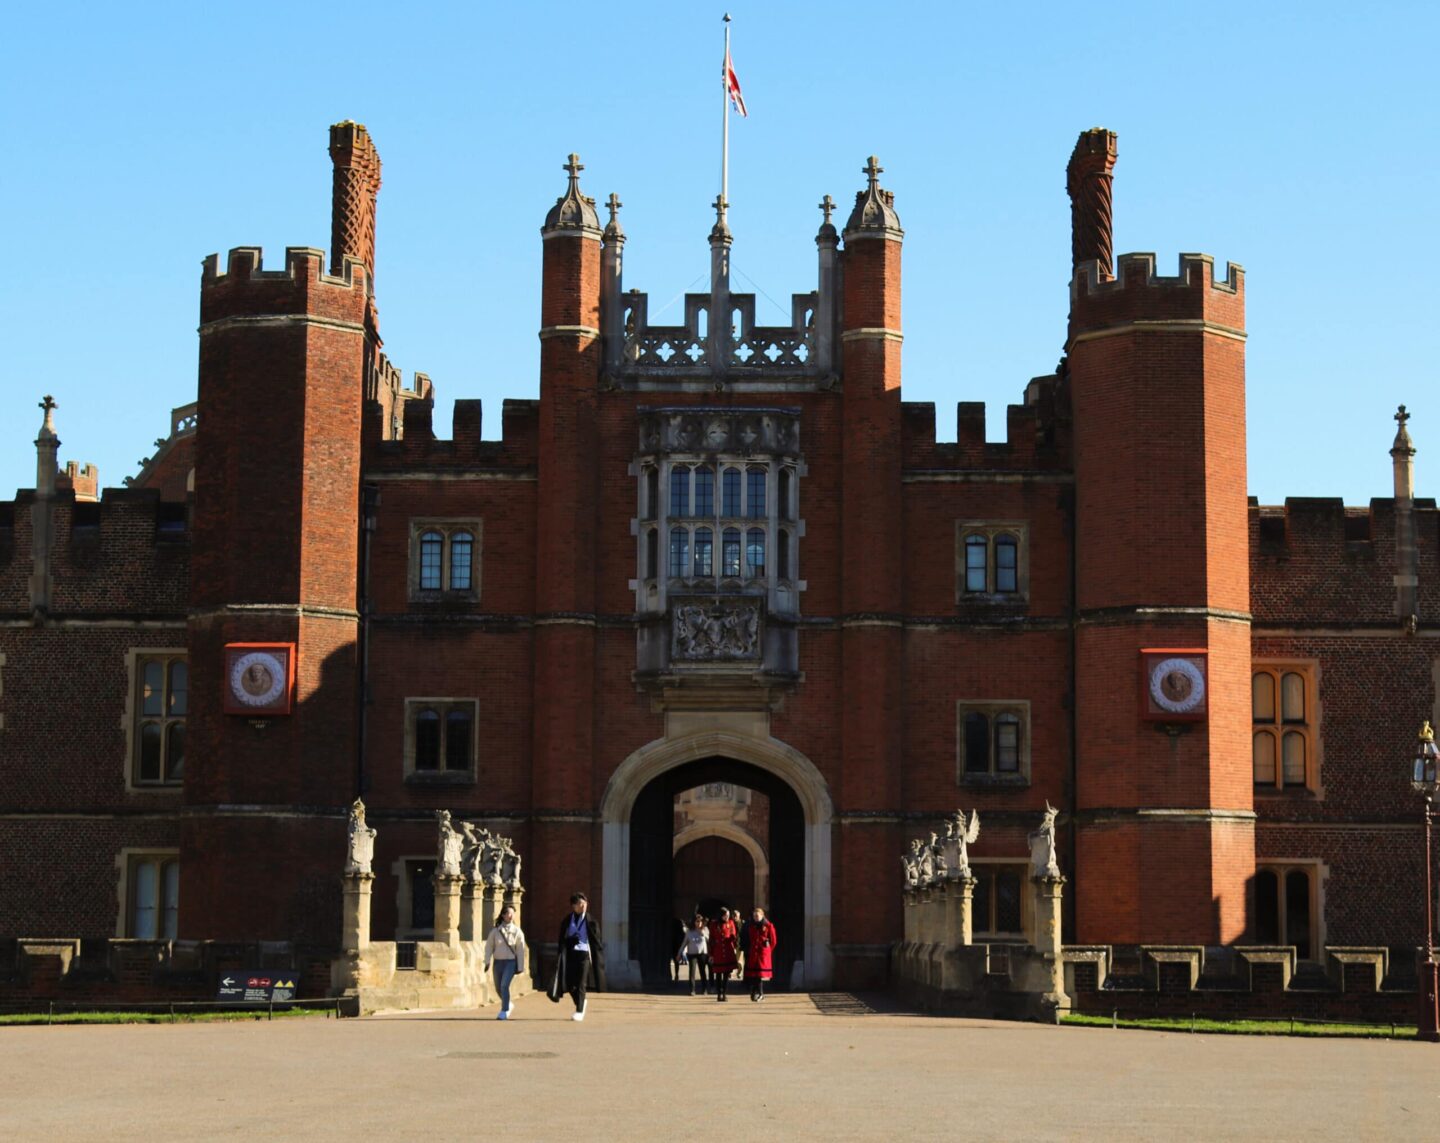 The west gate is the main entrance to Hampton Court Palace and where your day trip will begin. 